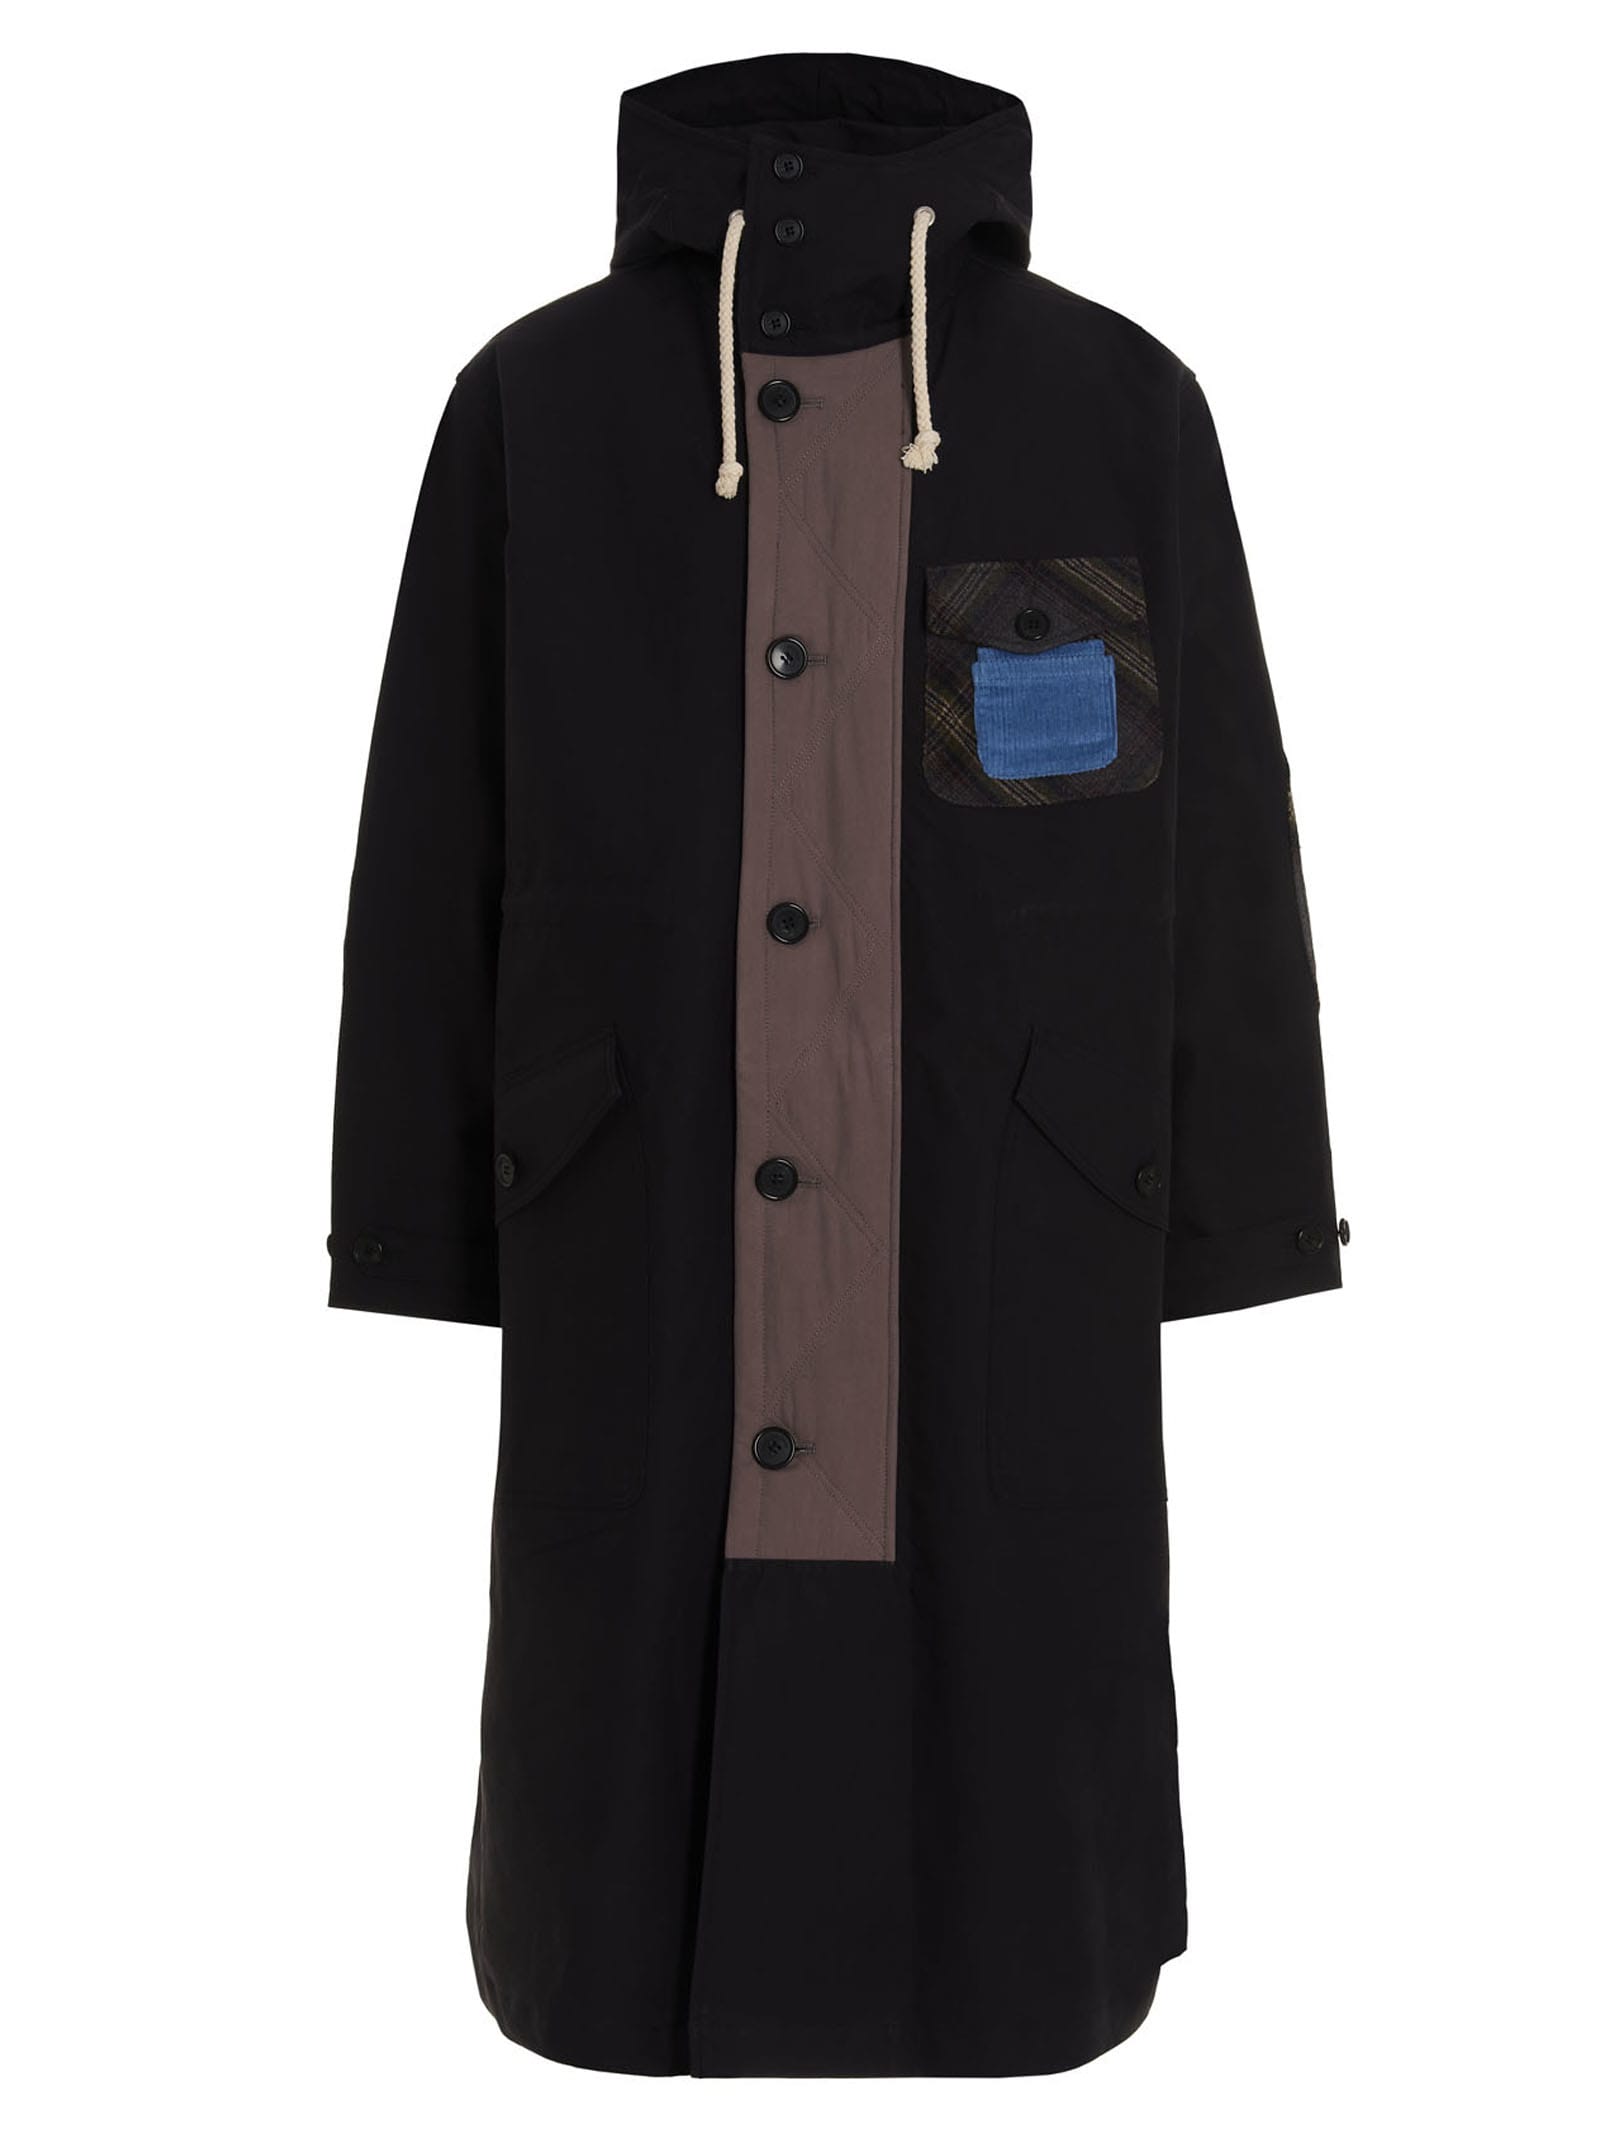 JW ANDERSON TRENCH,CO0157PG0579 999